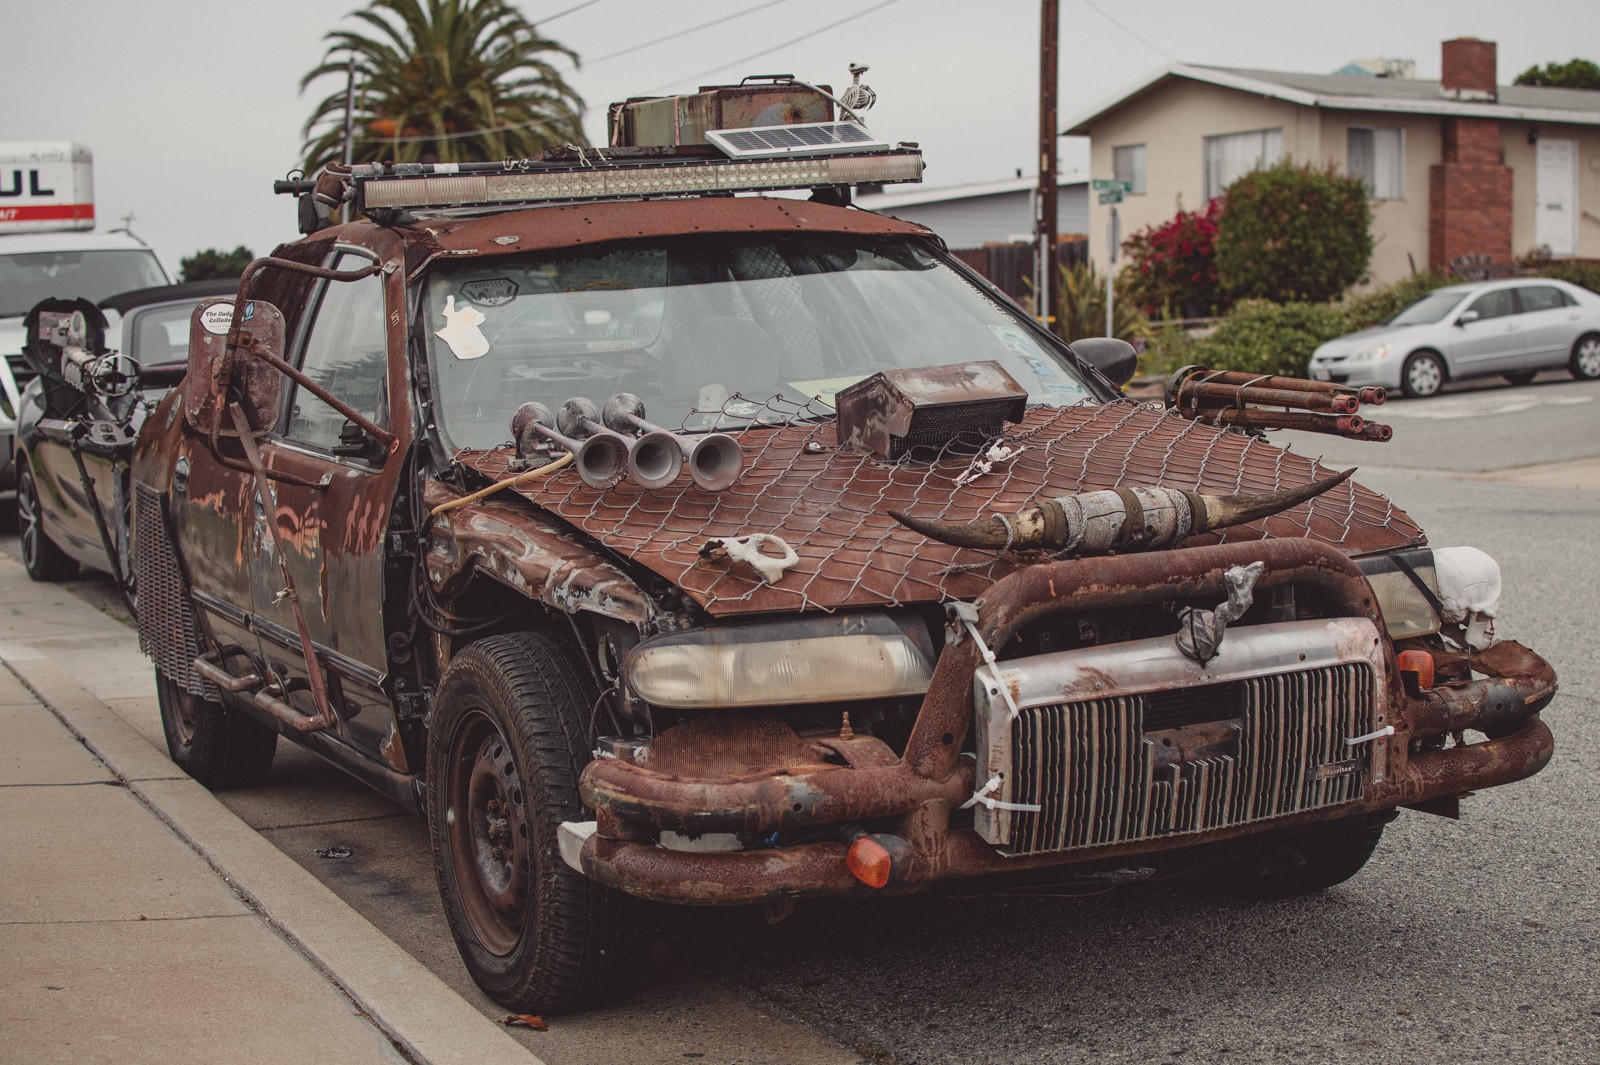 Rusted misfit at the Concours d'Lemons